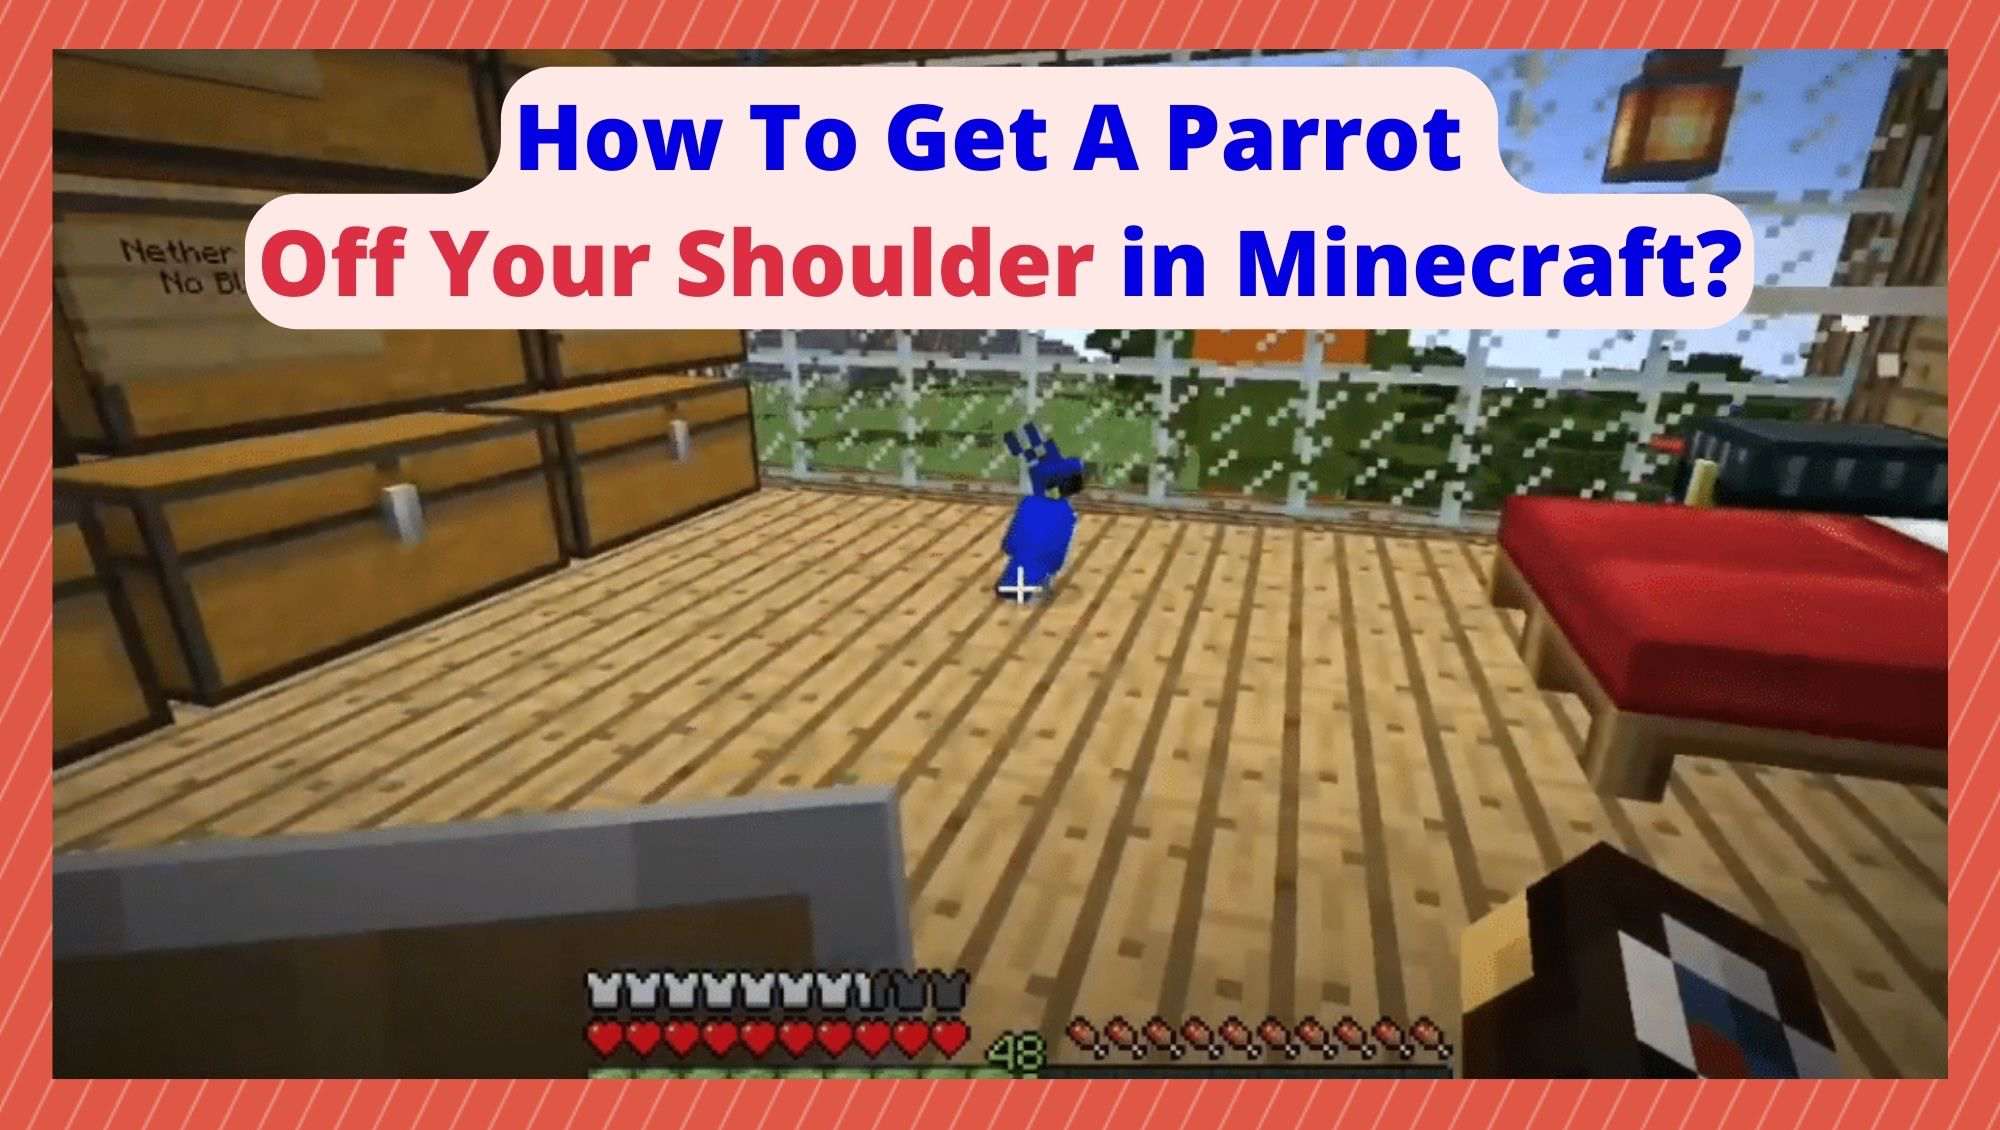 How To Get A Parrot Off Your Shoulder in Minecraft